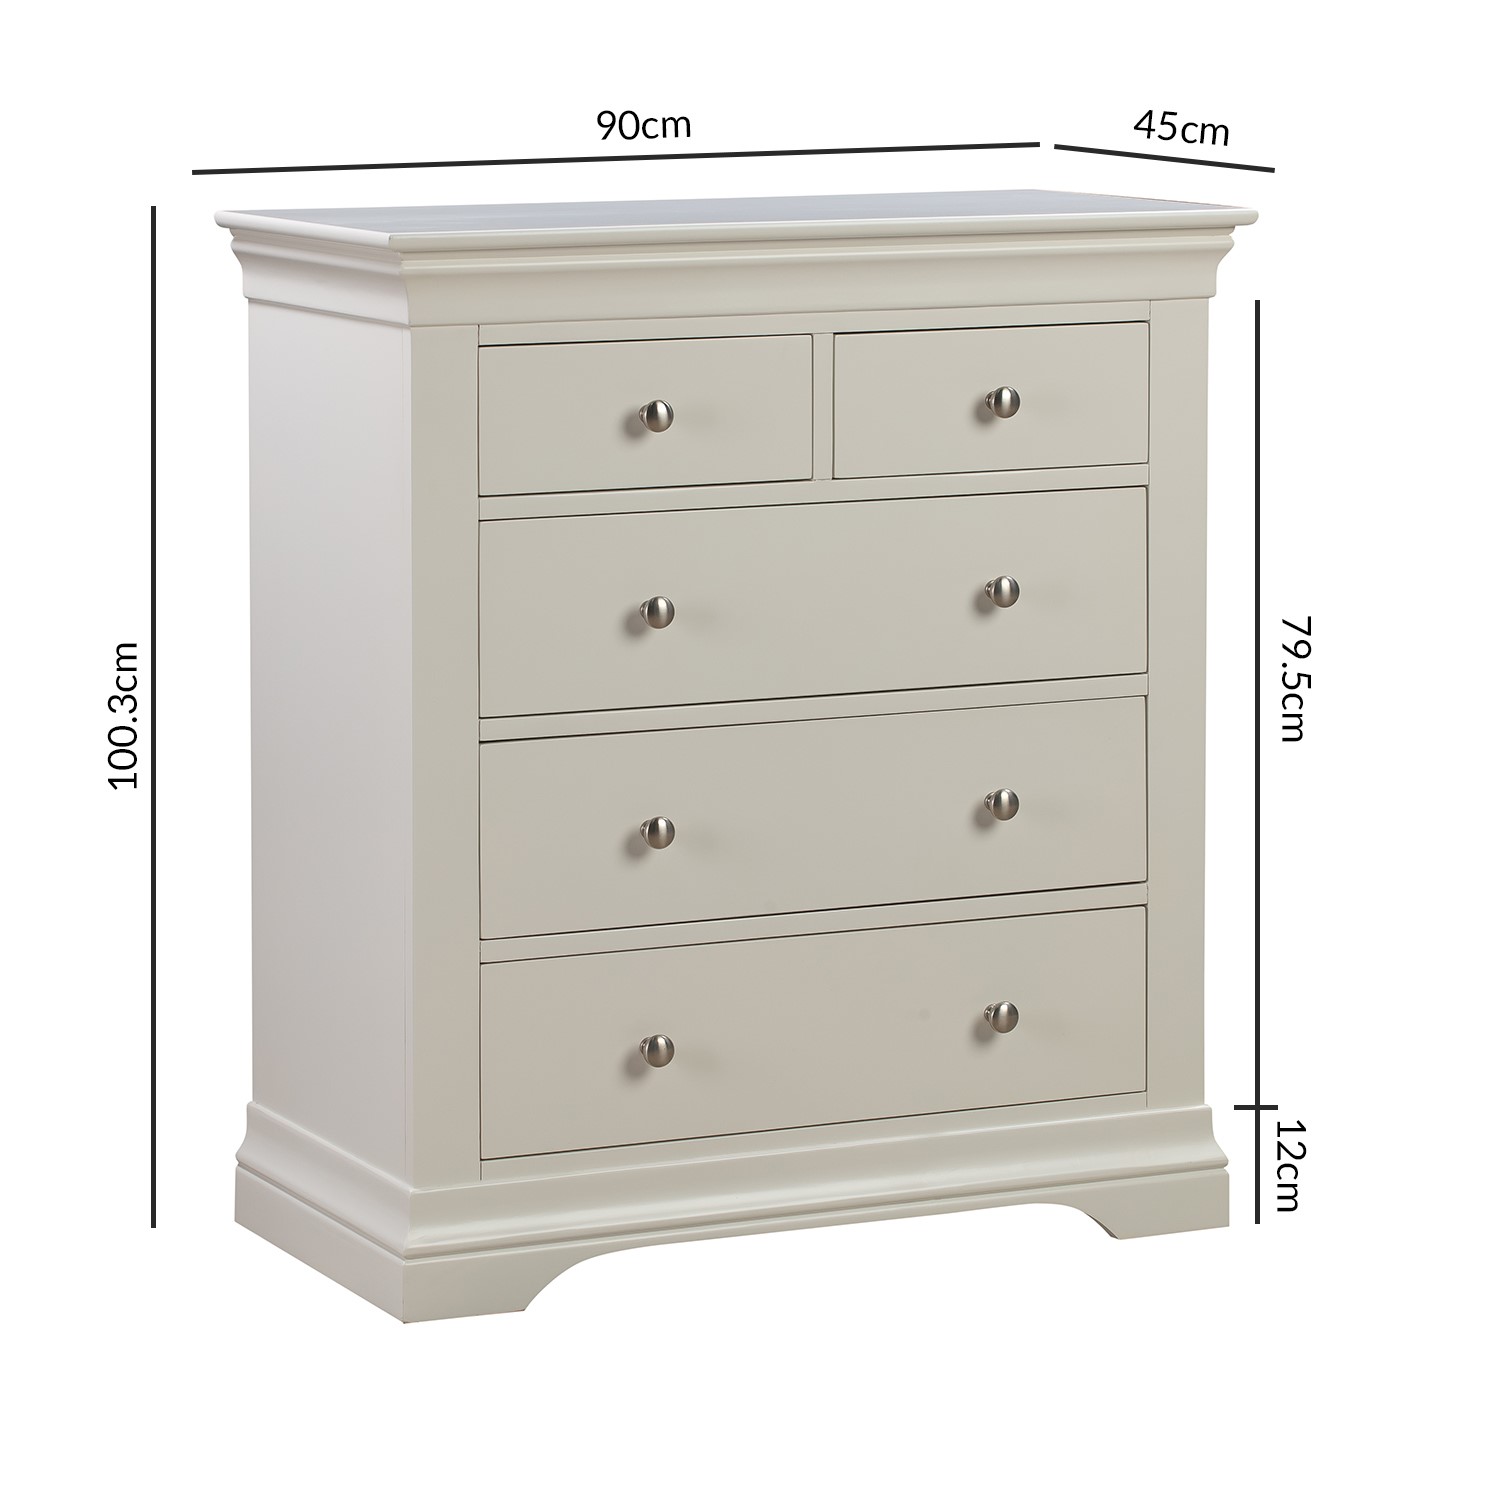 Olivia Off White 3 + 2 Drawer Chest of Drawers - Furniture123